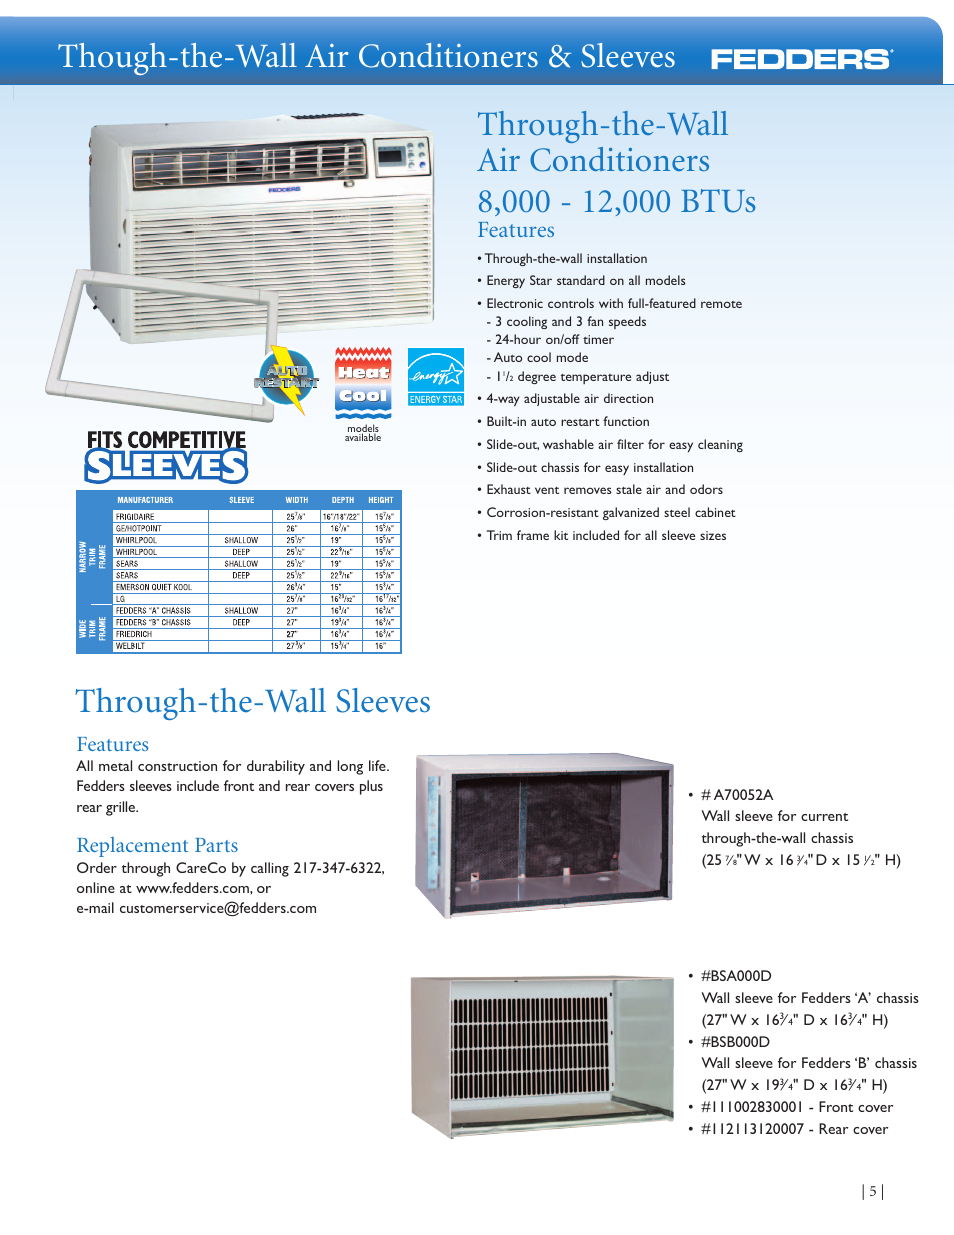 Thoughthewall air conditioners & sleeves, Throughthewall sleeves, Features Fedders Room